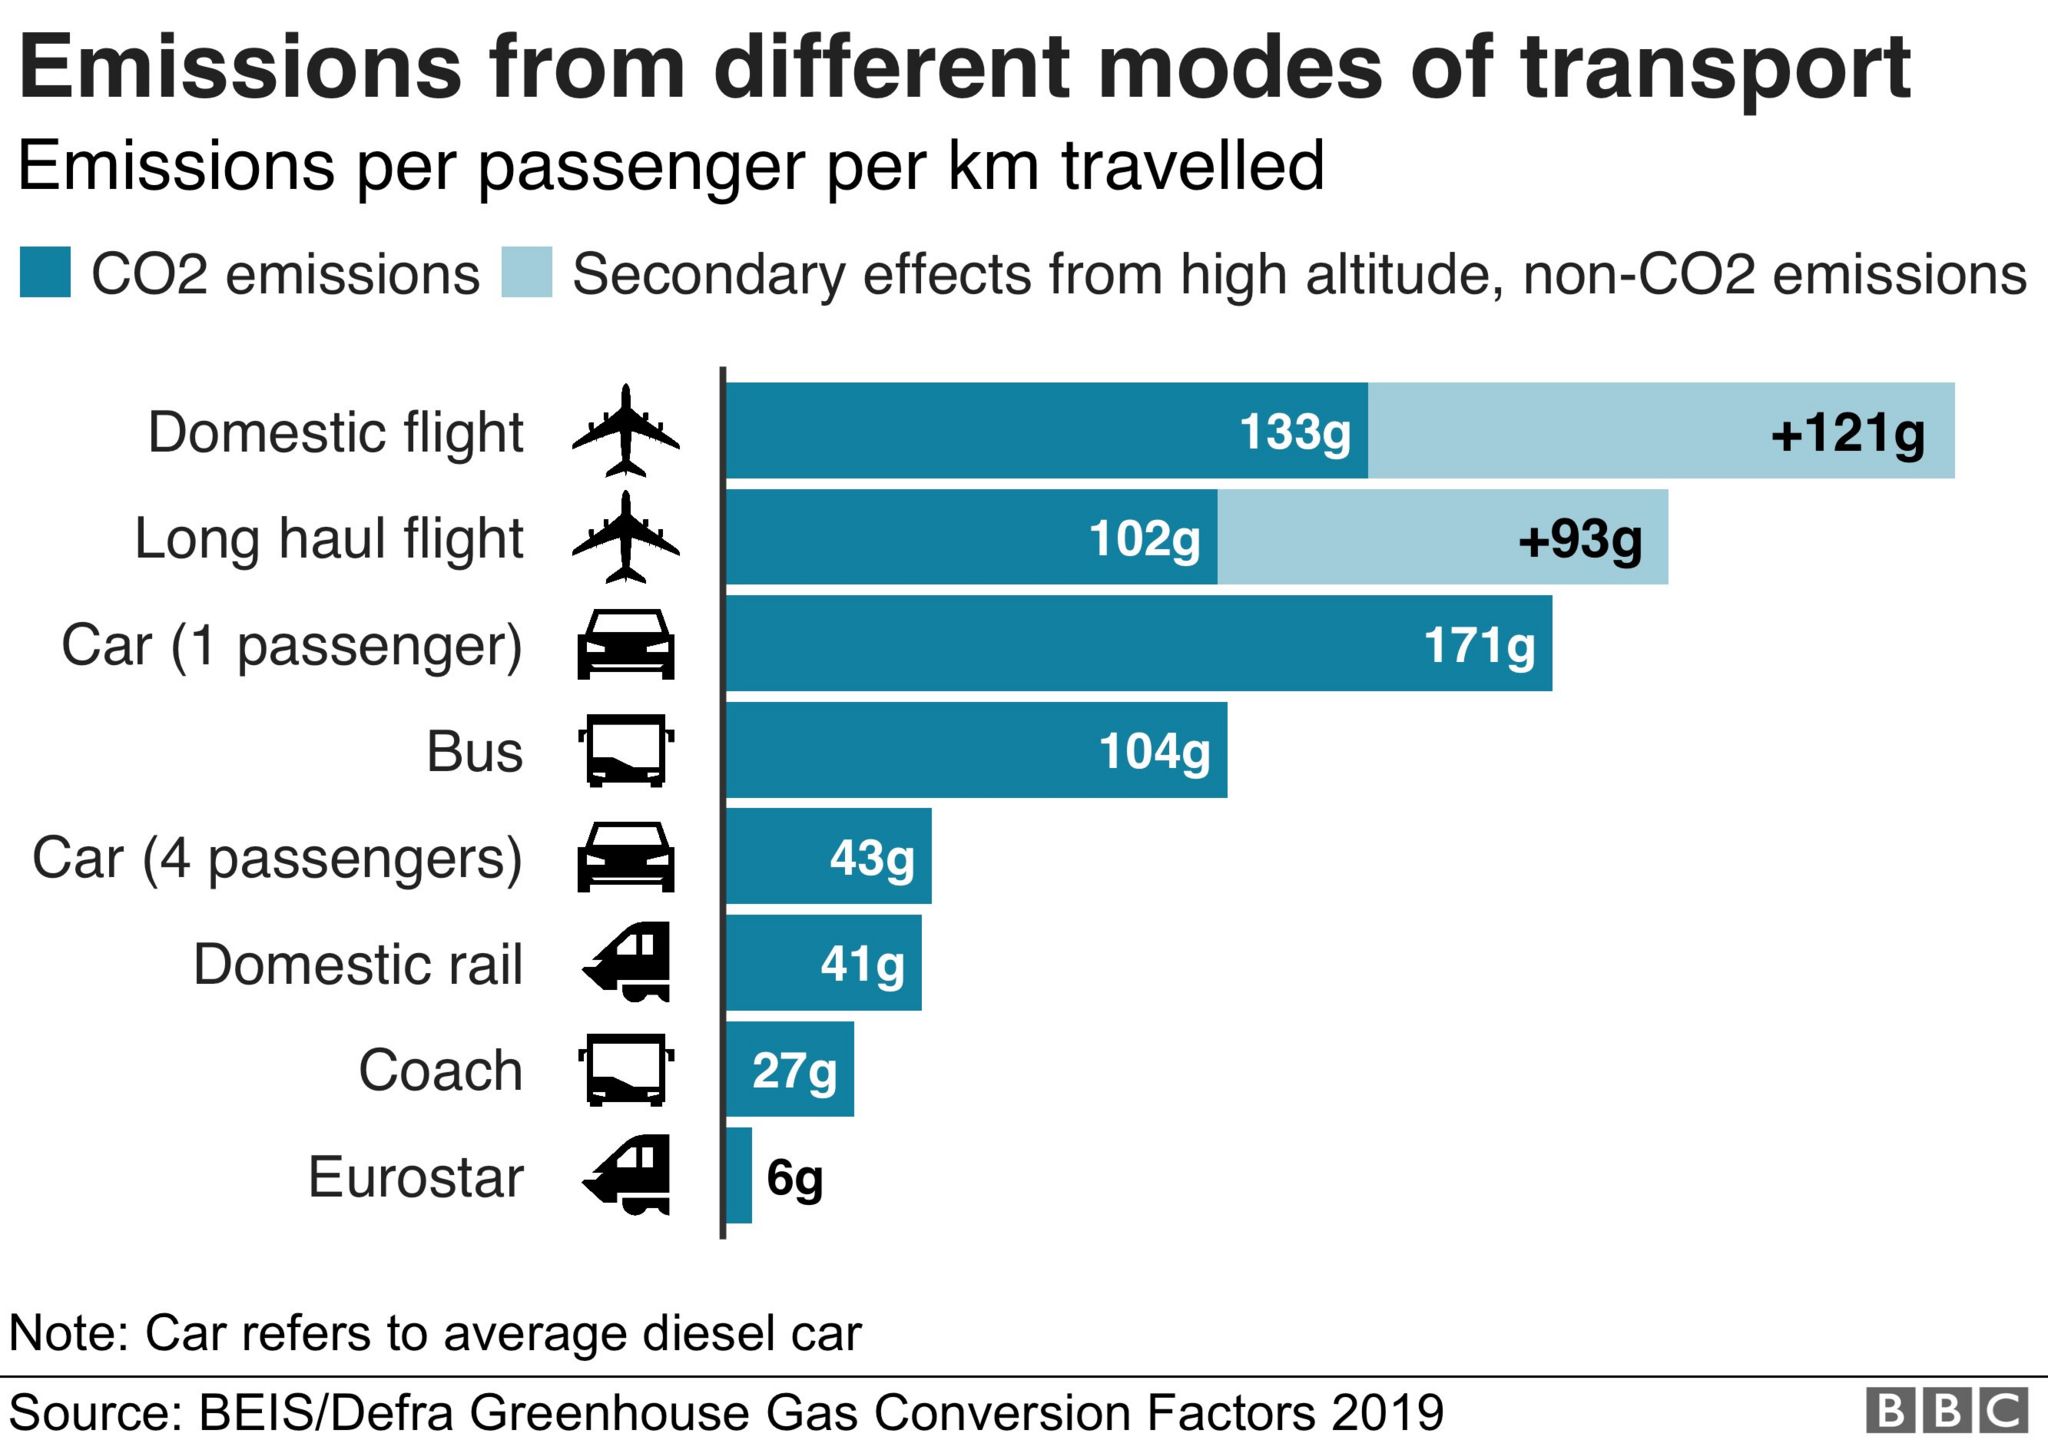 Bar chart showing emissions from different modes of transport